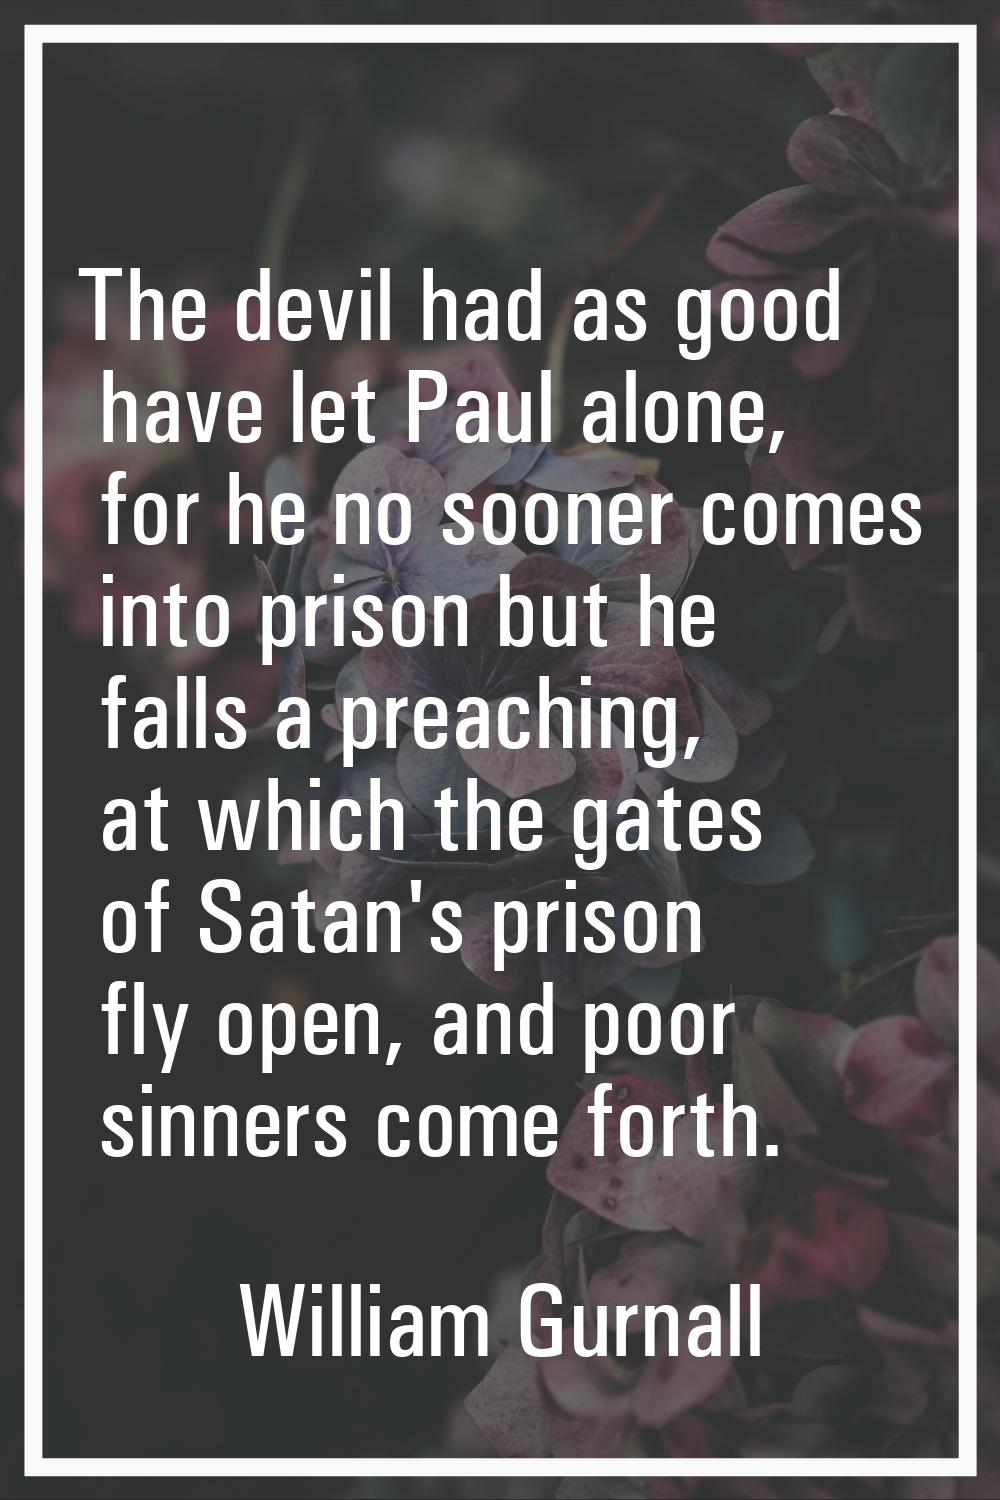 The devil had as good have let Paul alone, for he no sooner comes into prison but he falls a preach